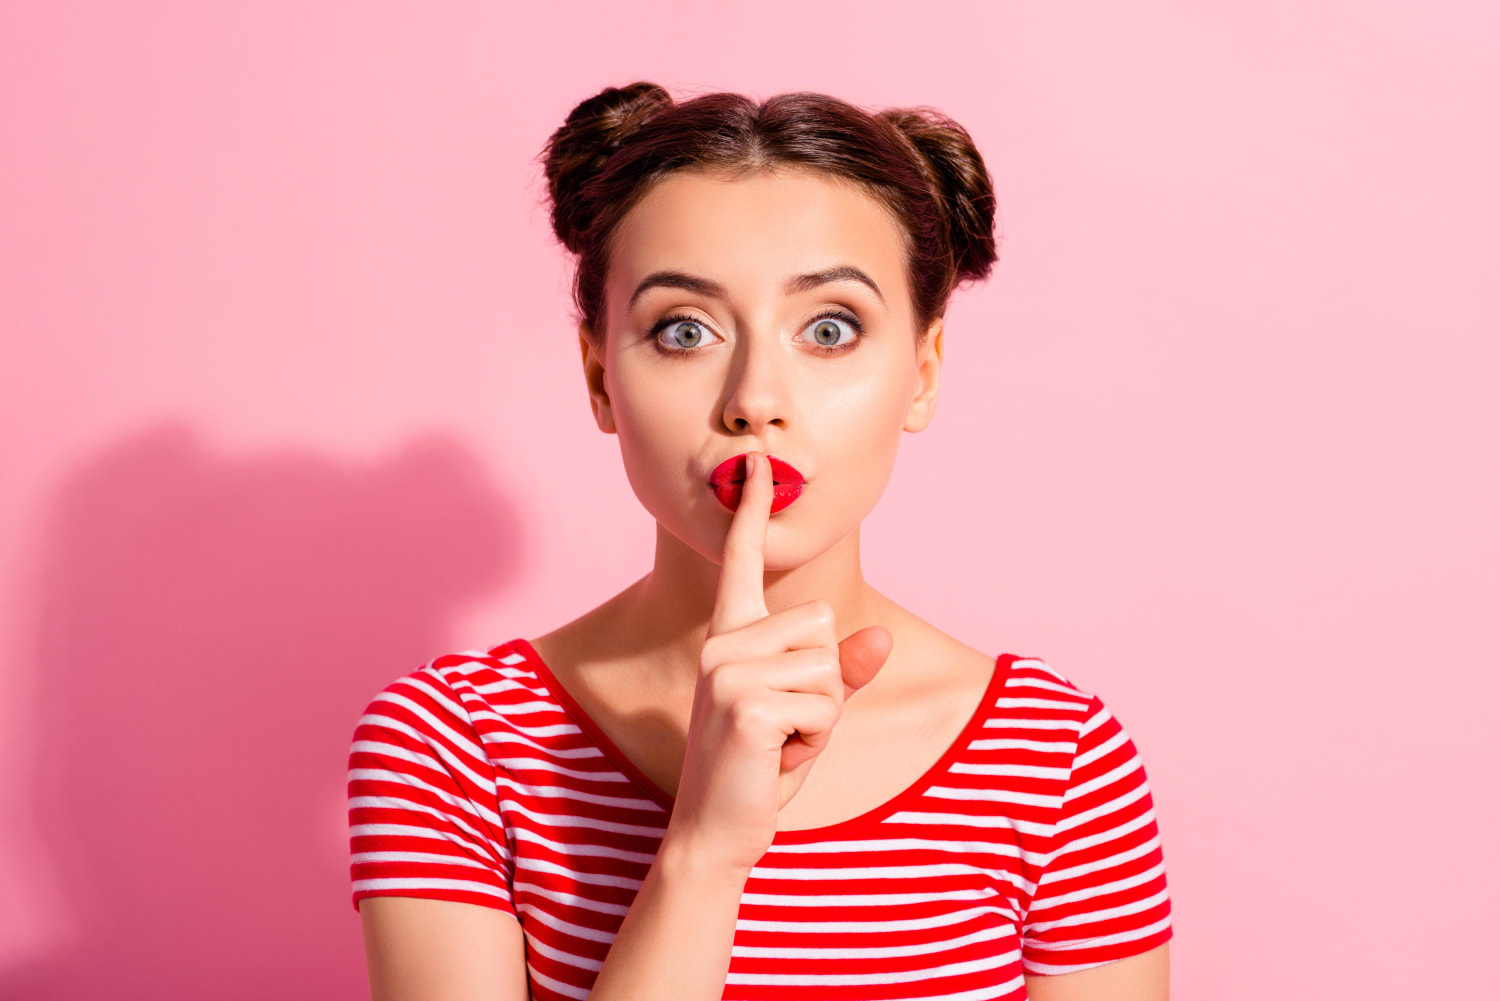 Mom raises the age-old question: When your kid tells you a secret, do you tell Dad?